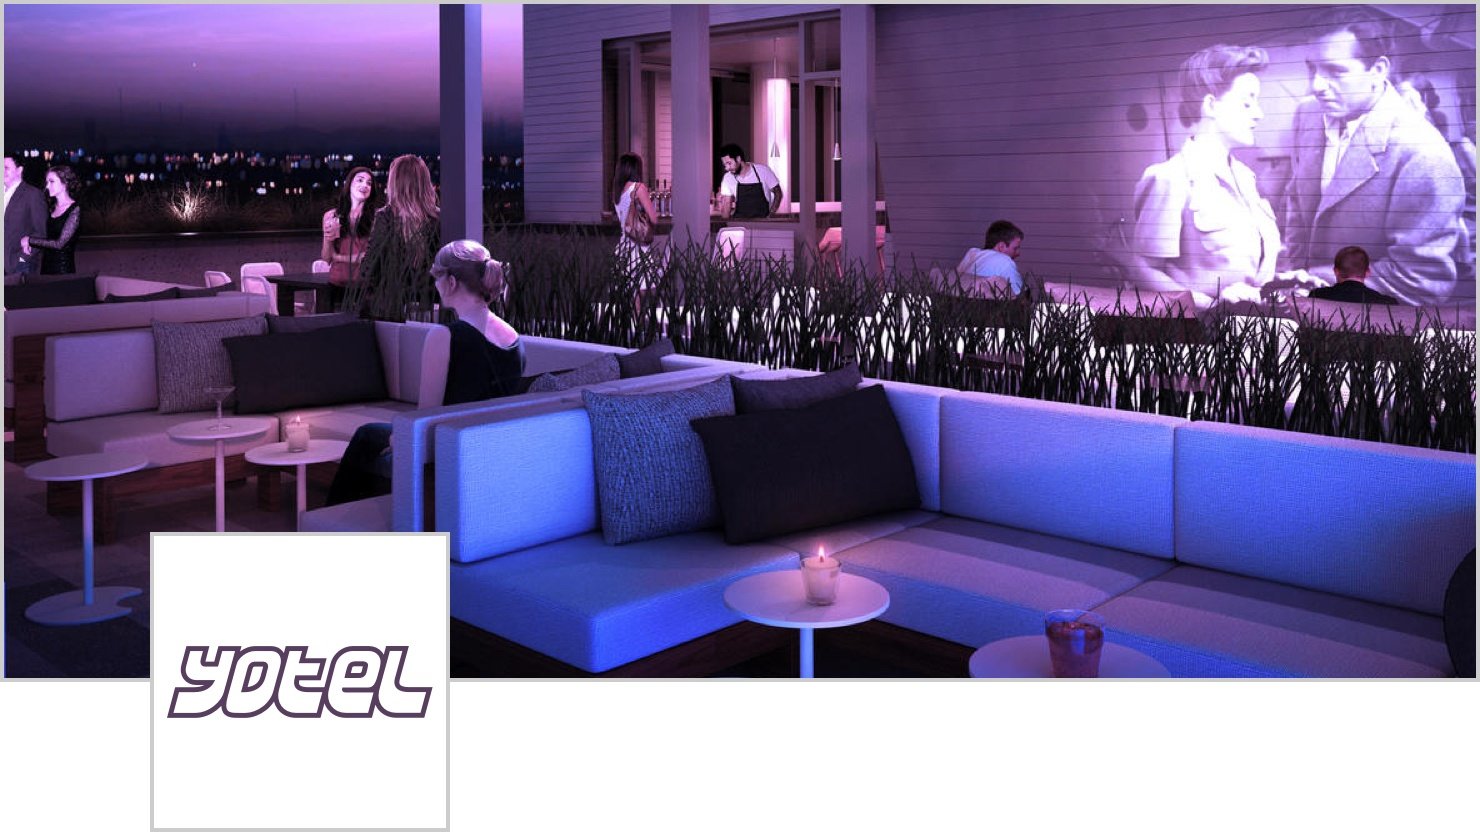 Brand, values, and communication reach YOTEL's global workforce